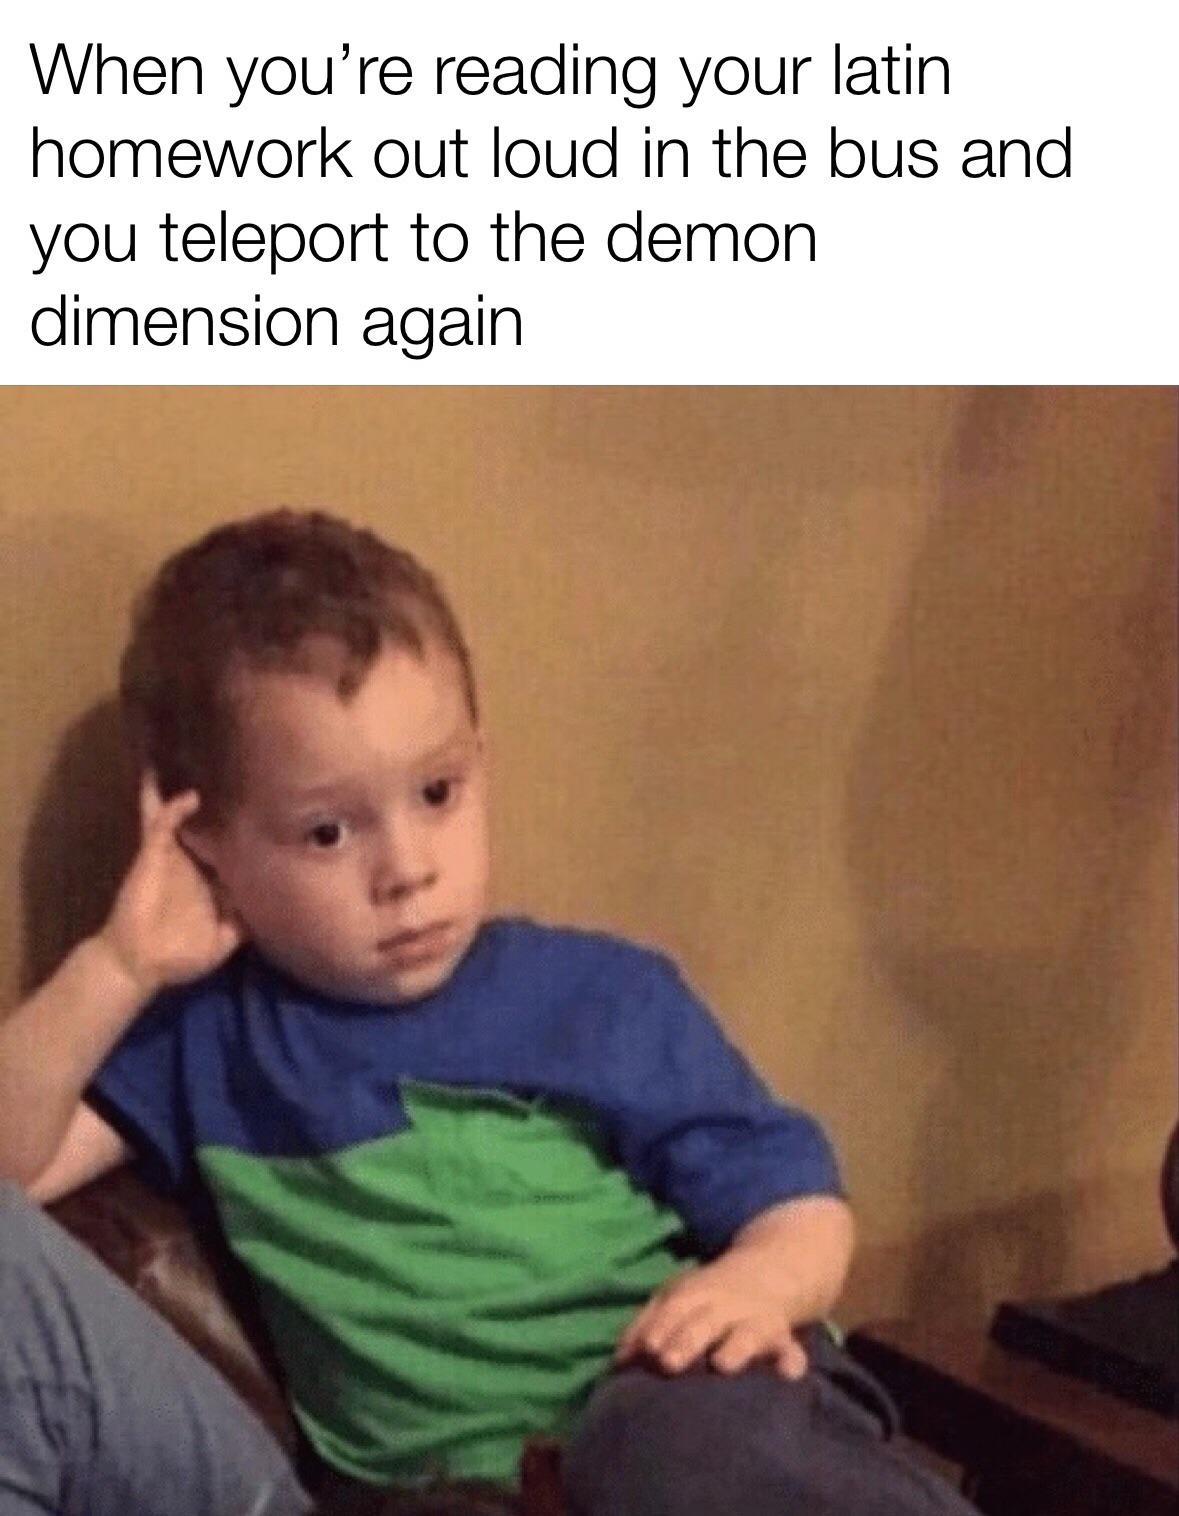 Dank Meme dank-memes cute text: When you're reading your latin homework out loud in the bus and you teleport to the demon dimension again 